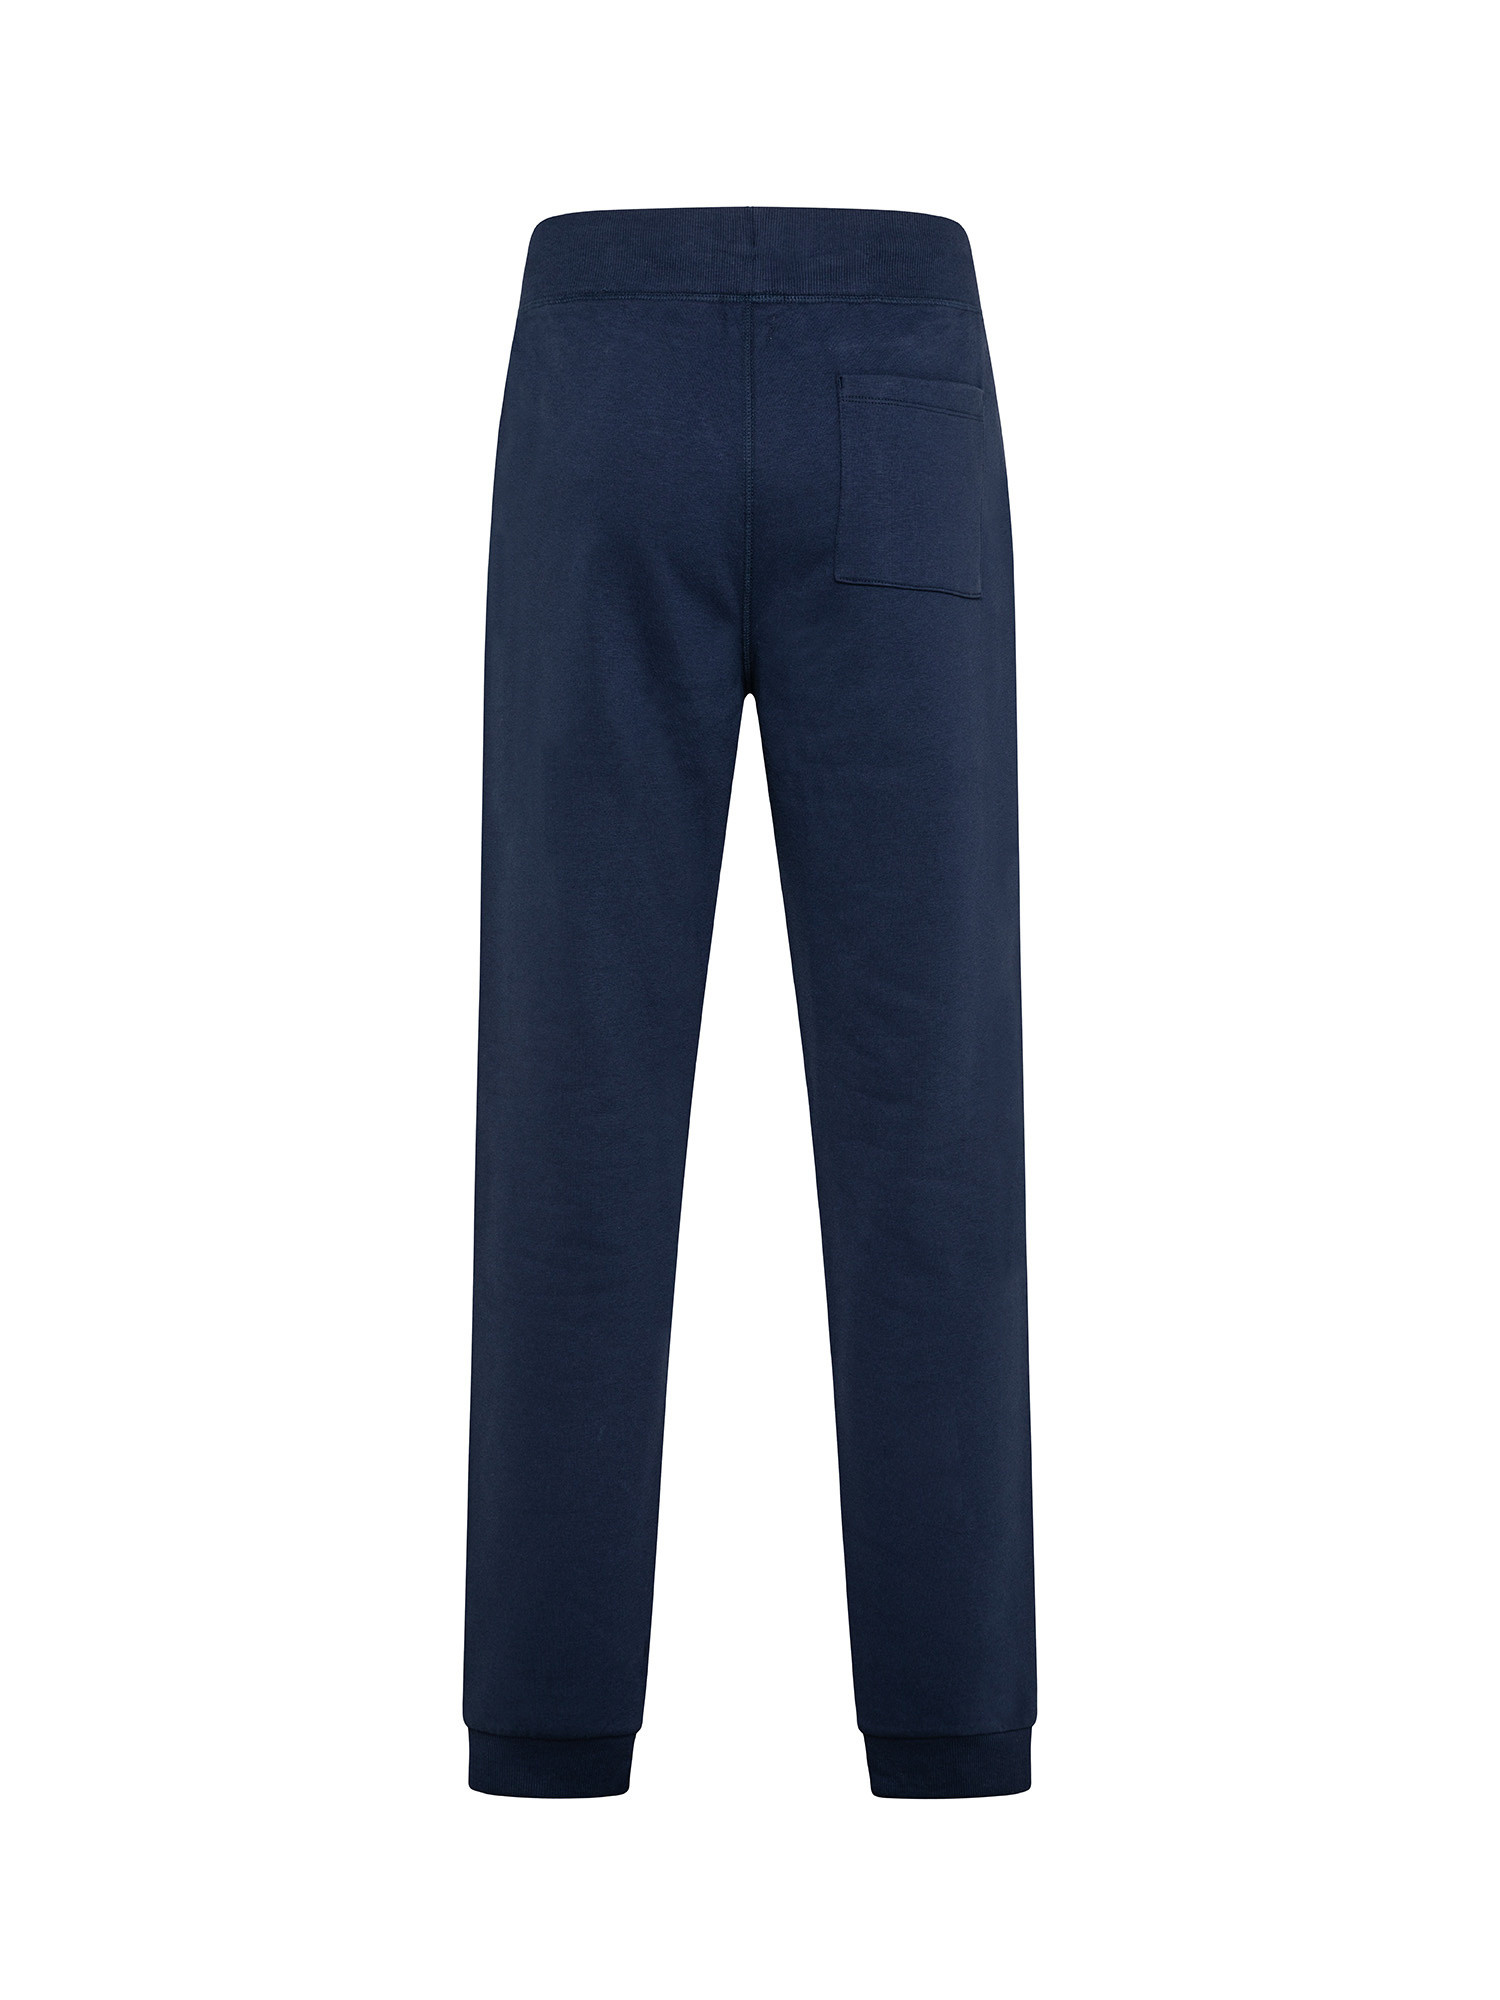 JCT - Soft touch five-pocket trousers, Blue, large image number 1